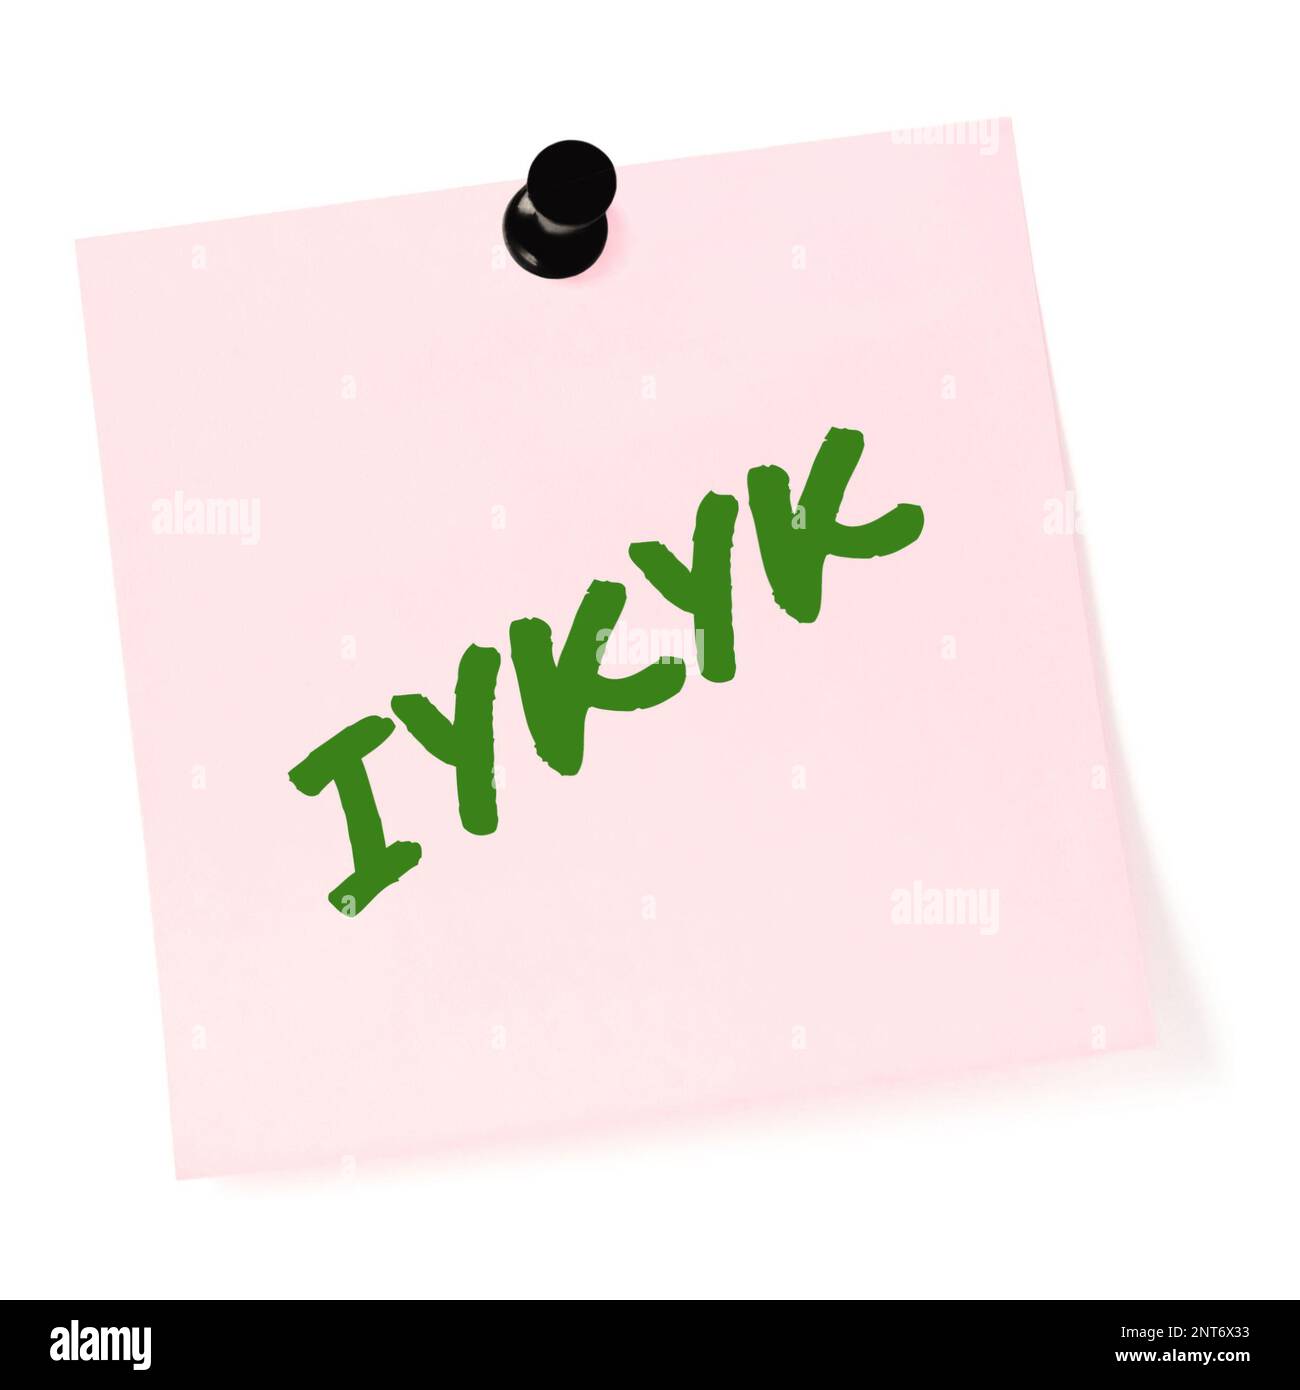 If you know, you know acronym IYKYK macro closeup, green marker text,  Tiktok jokes concept, isolated pink adhesive post-it note, black pushpin  Stock Photo - Alamy